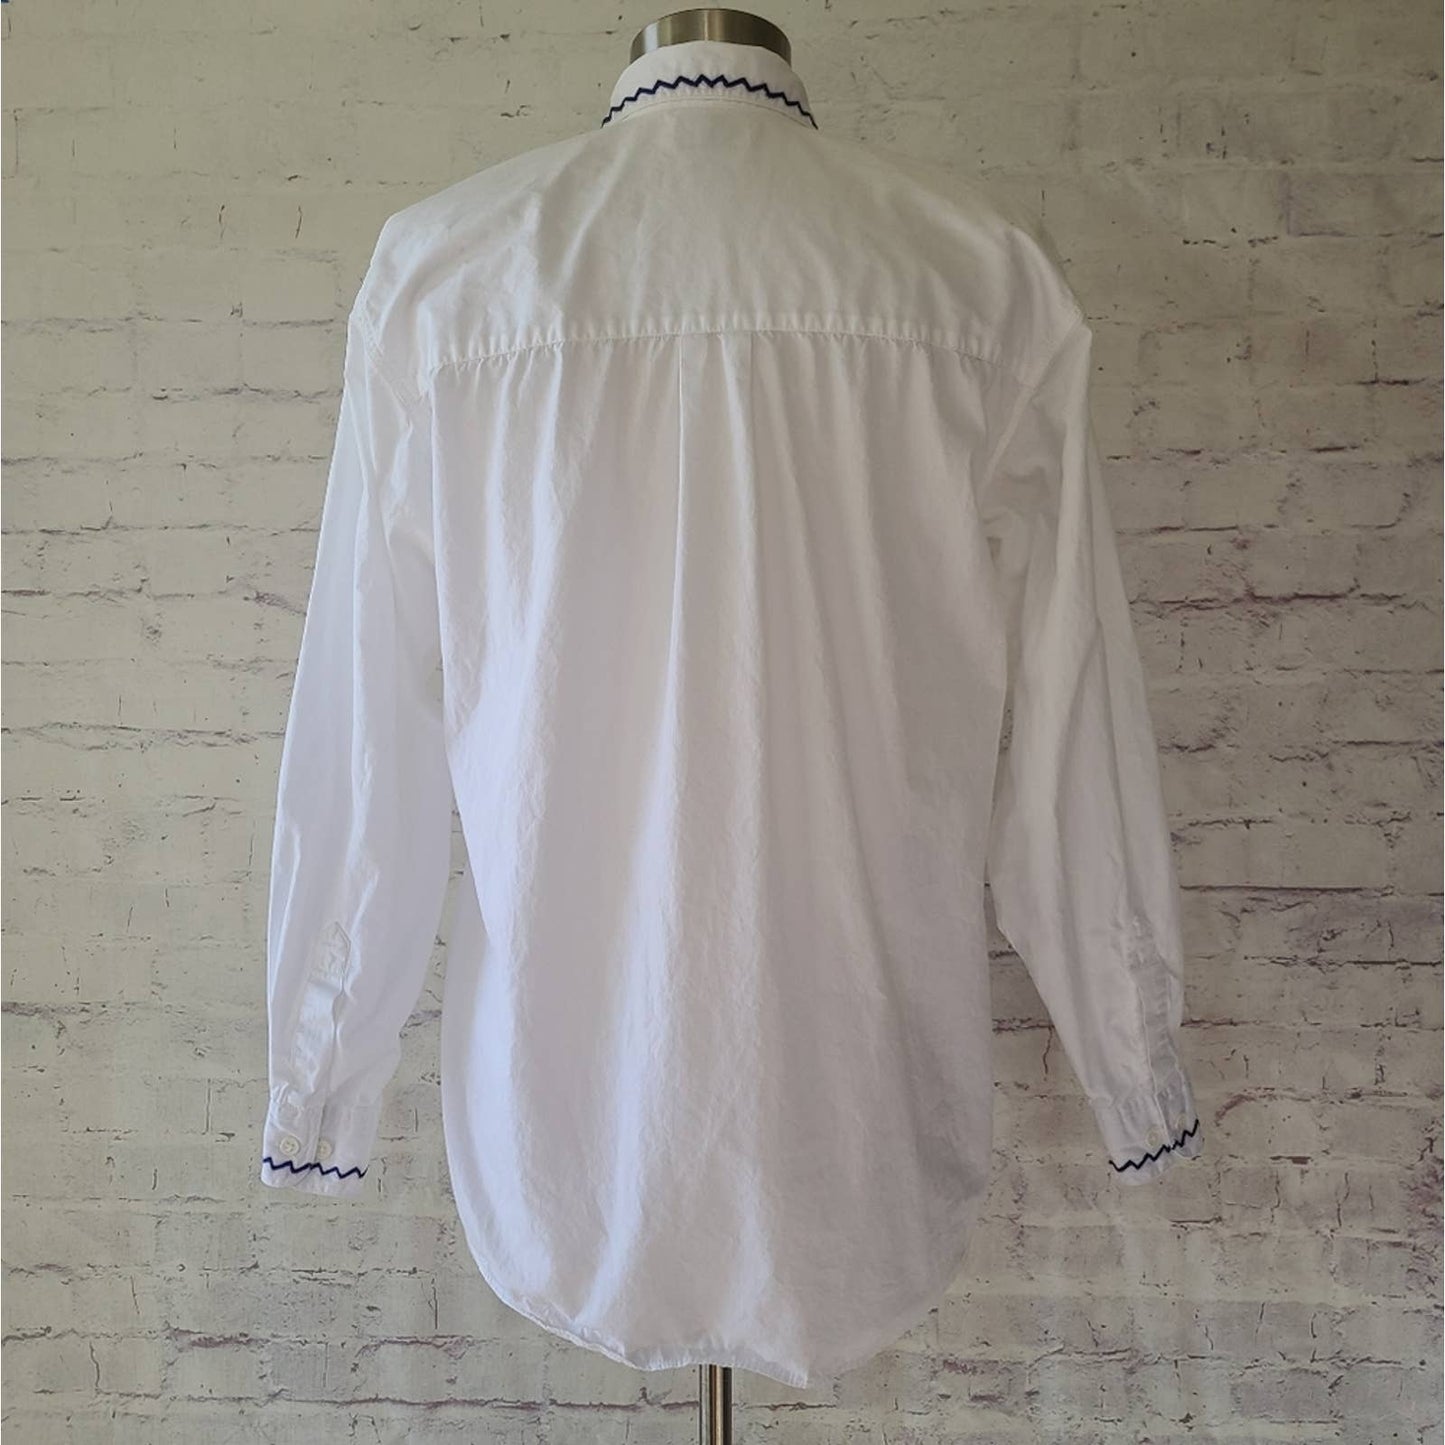 Vintage Chic Schooners Embroidered Long Sleeve White Cotton Button Up Shirt Med